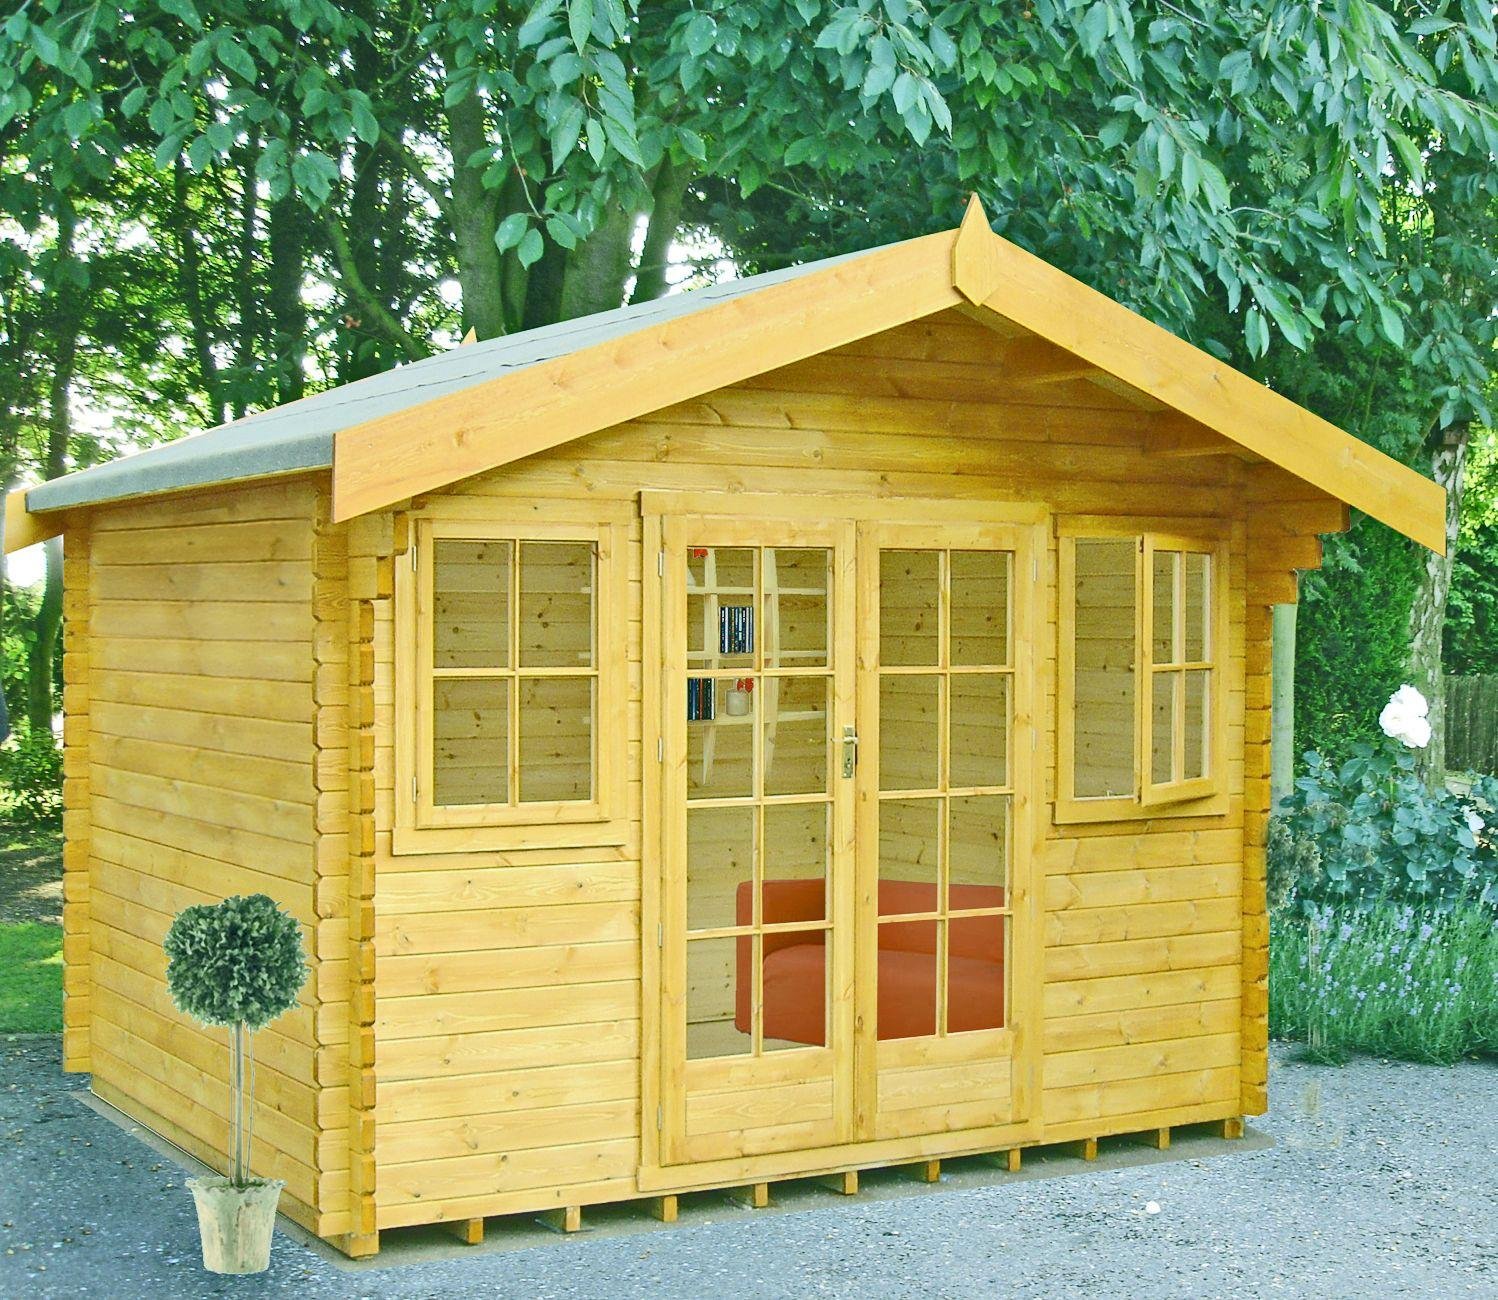 Homewood Clipstone Wooden Cabin - 14 x 14ft. Review